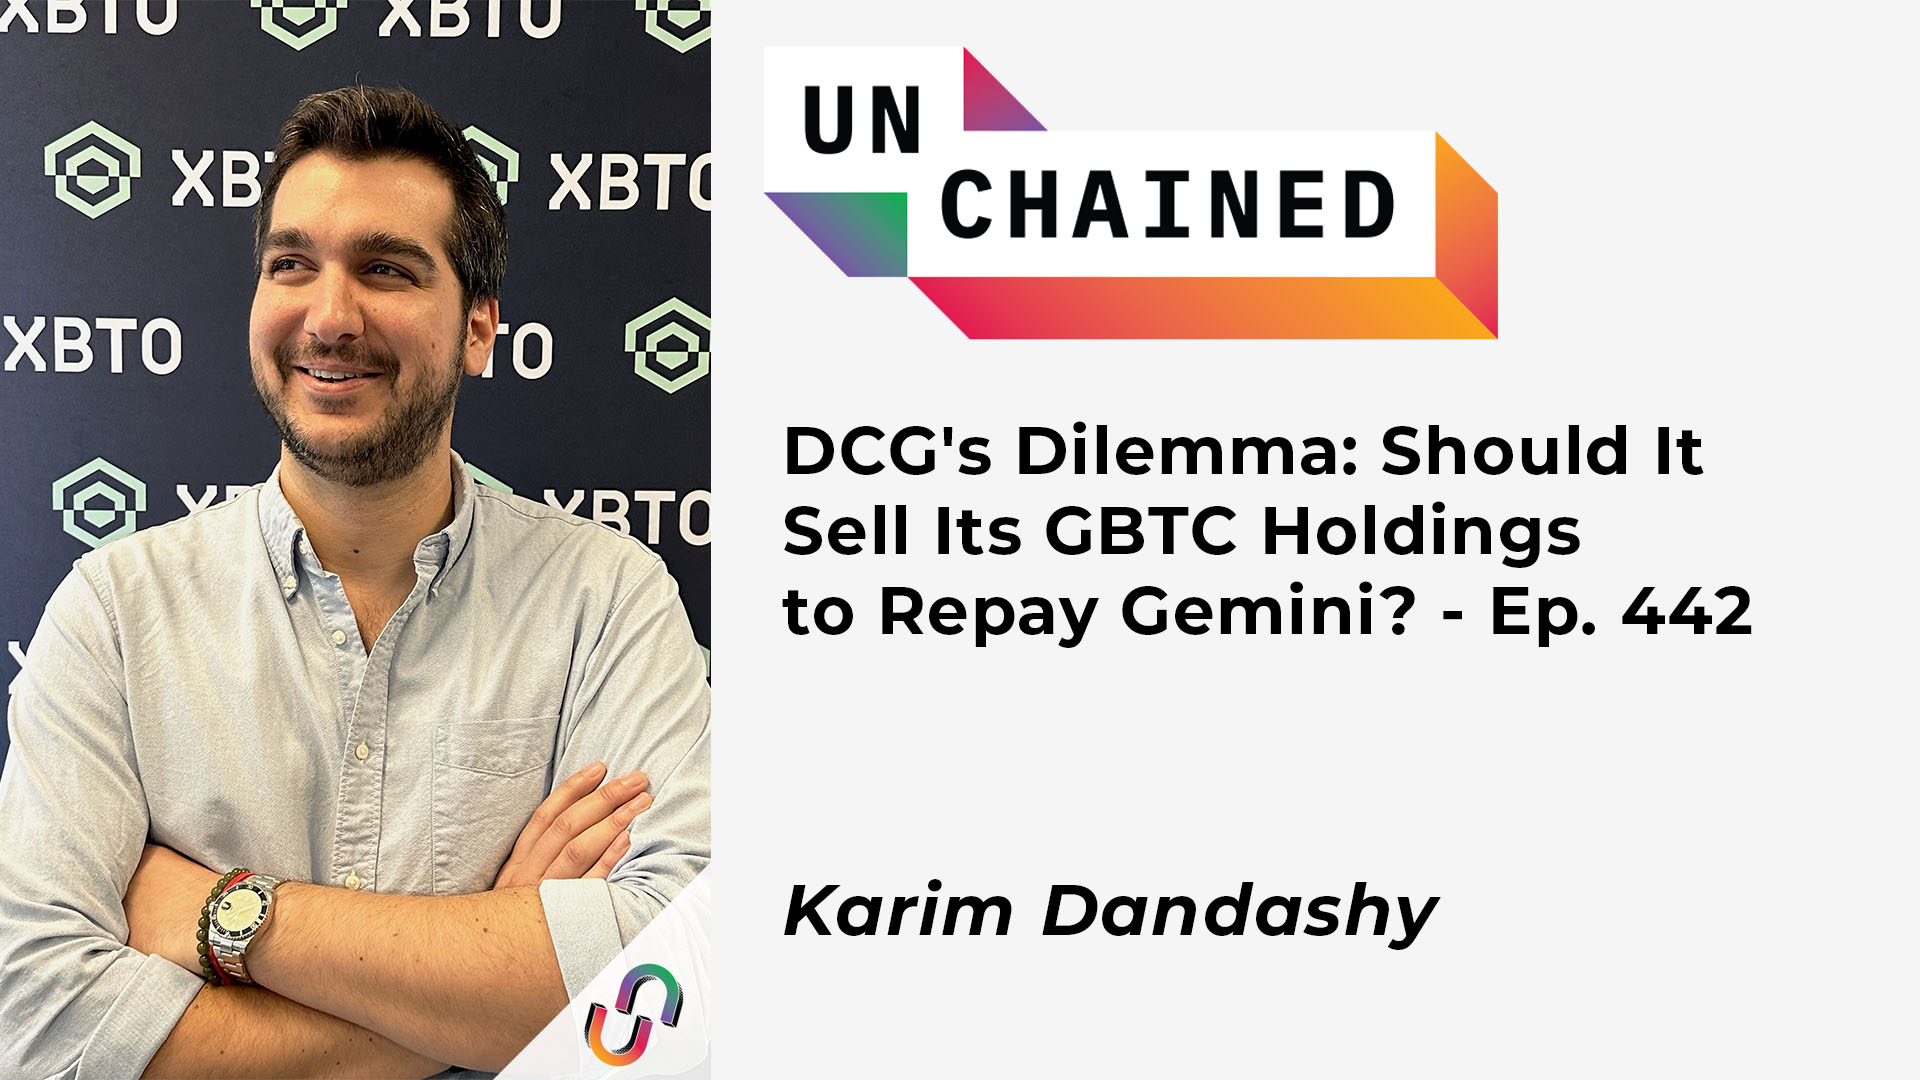 DCG's Dilemma: Should It Sell Its GBTC Holdings to Repay Gemini? - Ep. 442